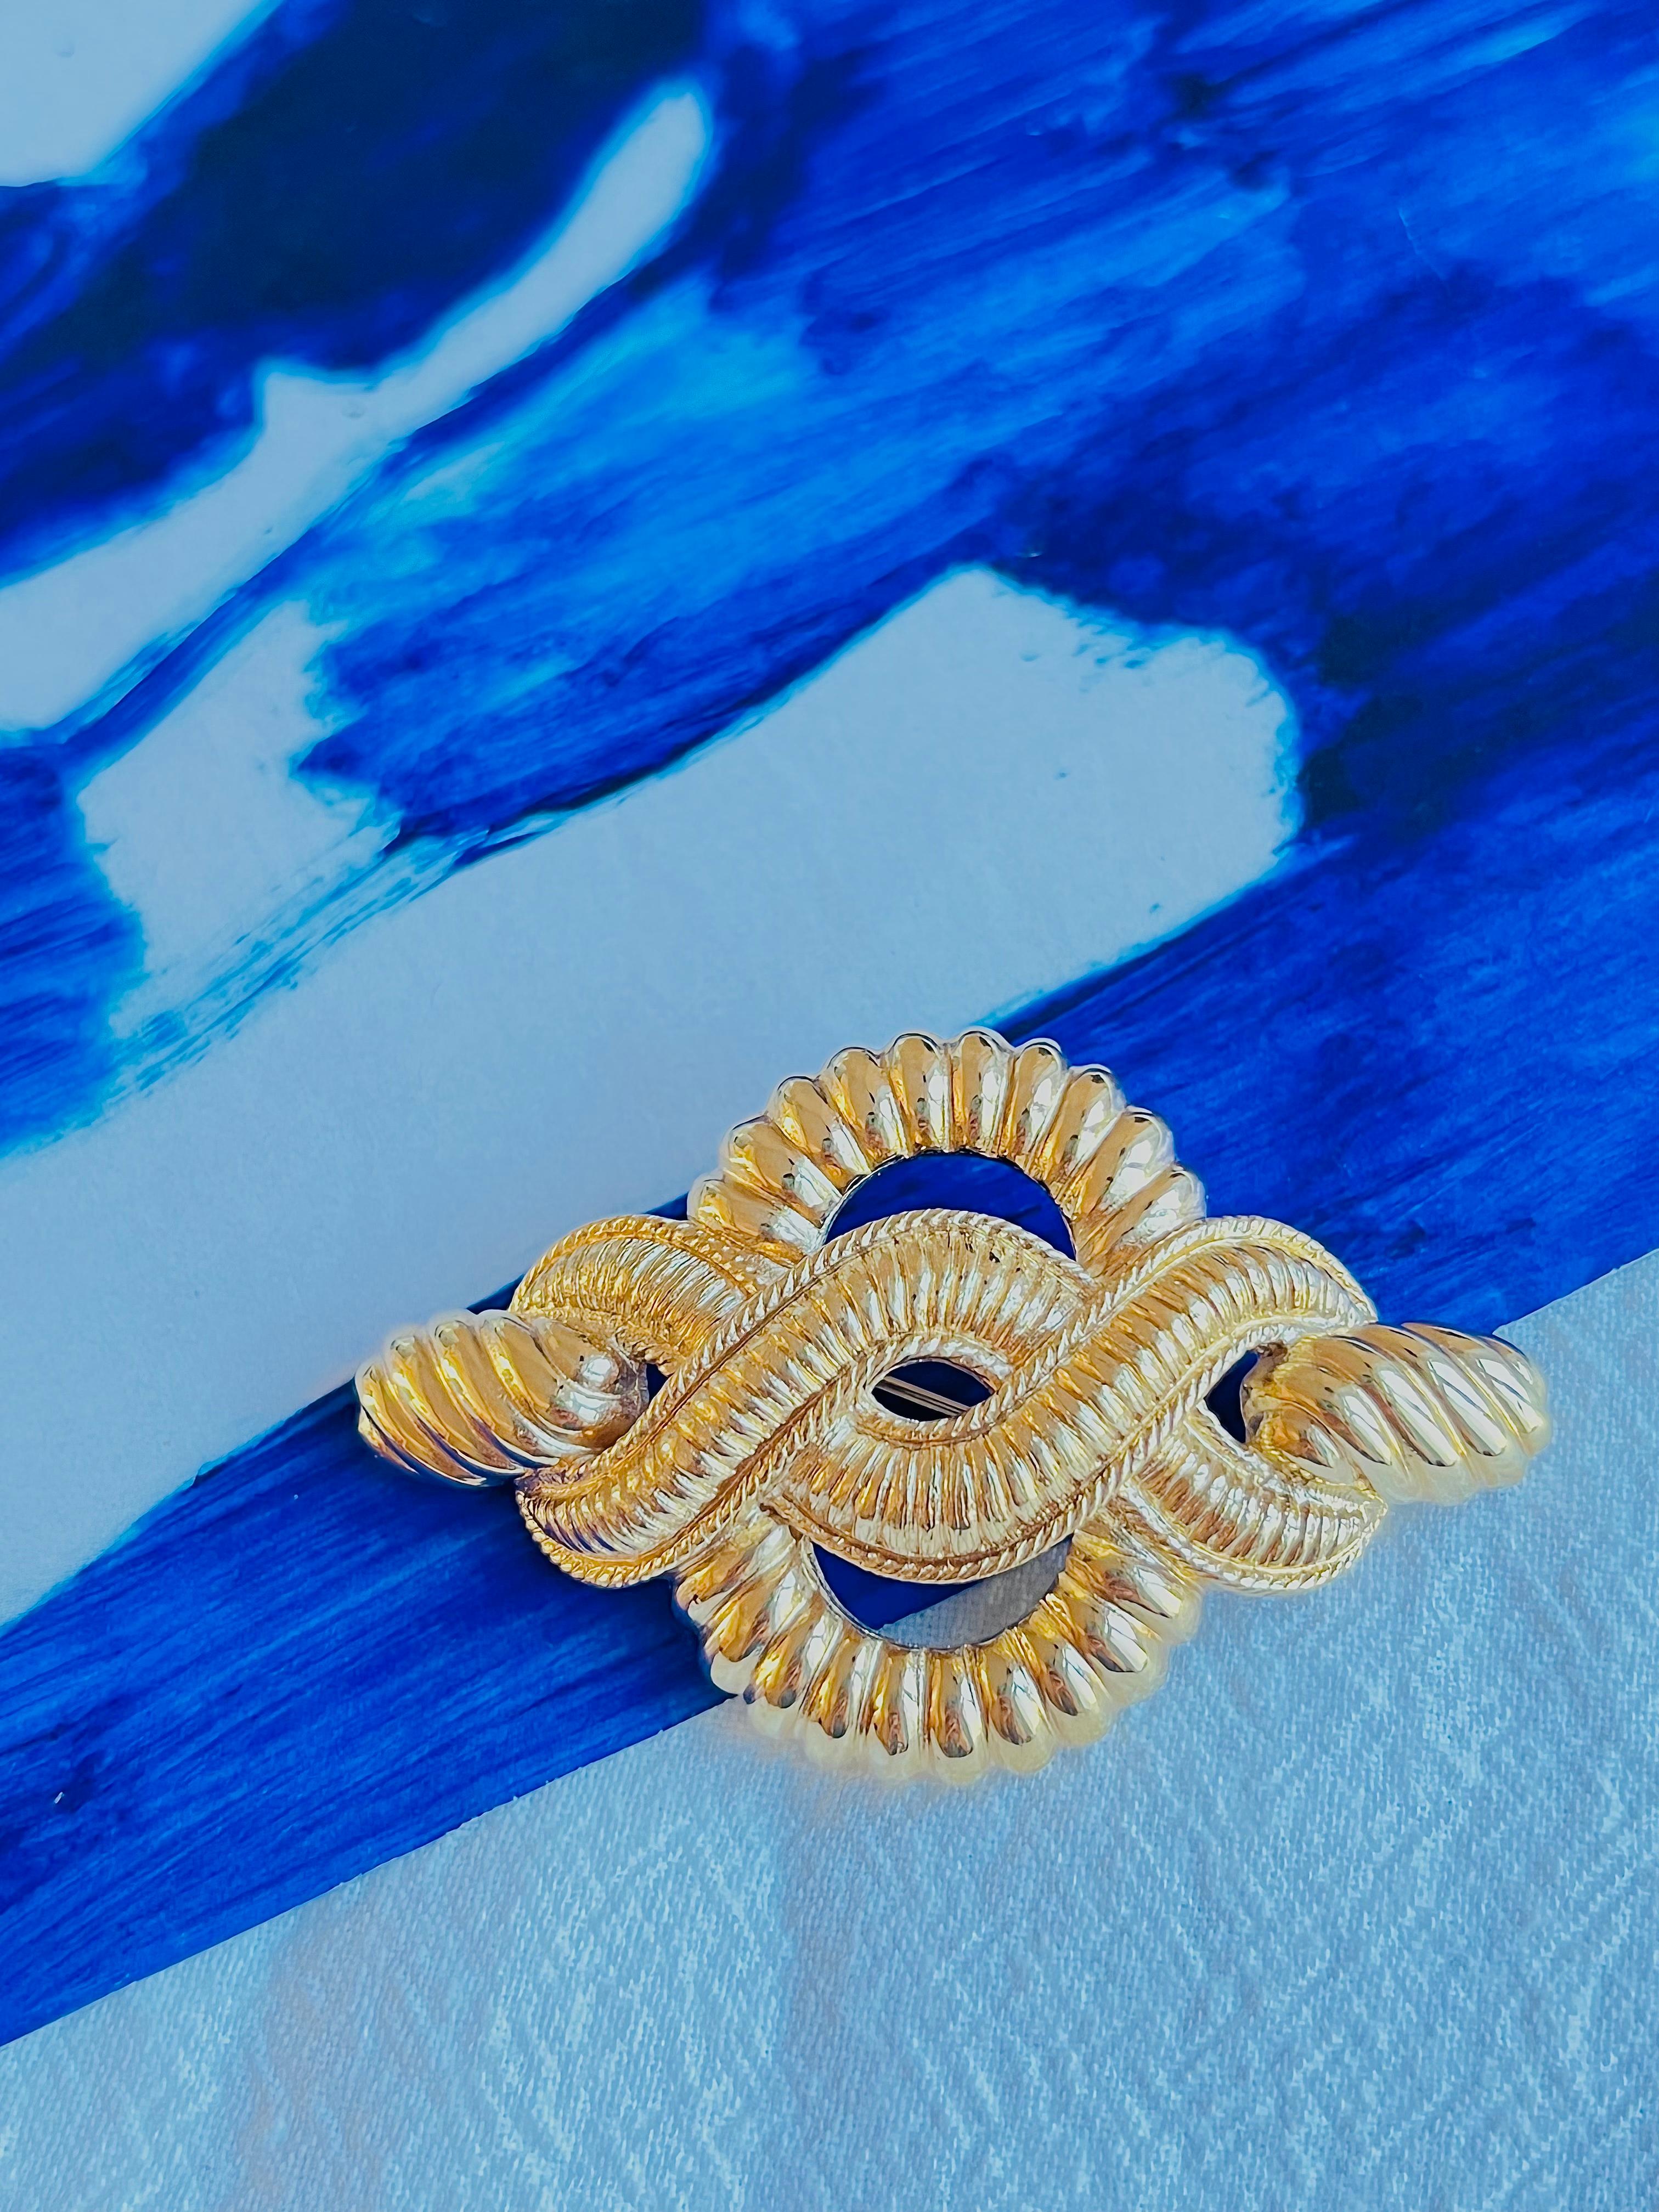 Very excellent condition. 100% Genuine.

A unique piece. This gold plated stylised brooch. Safety-catch pin closure, signed on the back.

Size: 6.5 cm x 3.5 cm.

Weight: 22.0 g.

_ _ _

Great for everyday wear. Come with velvet pouch and beautiful